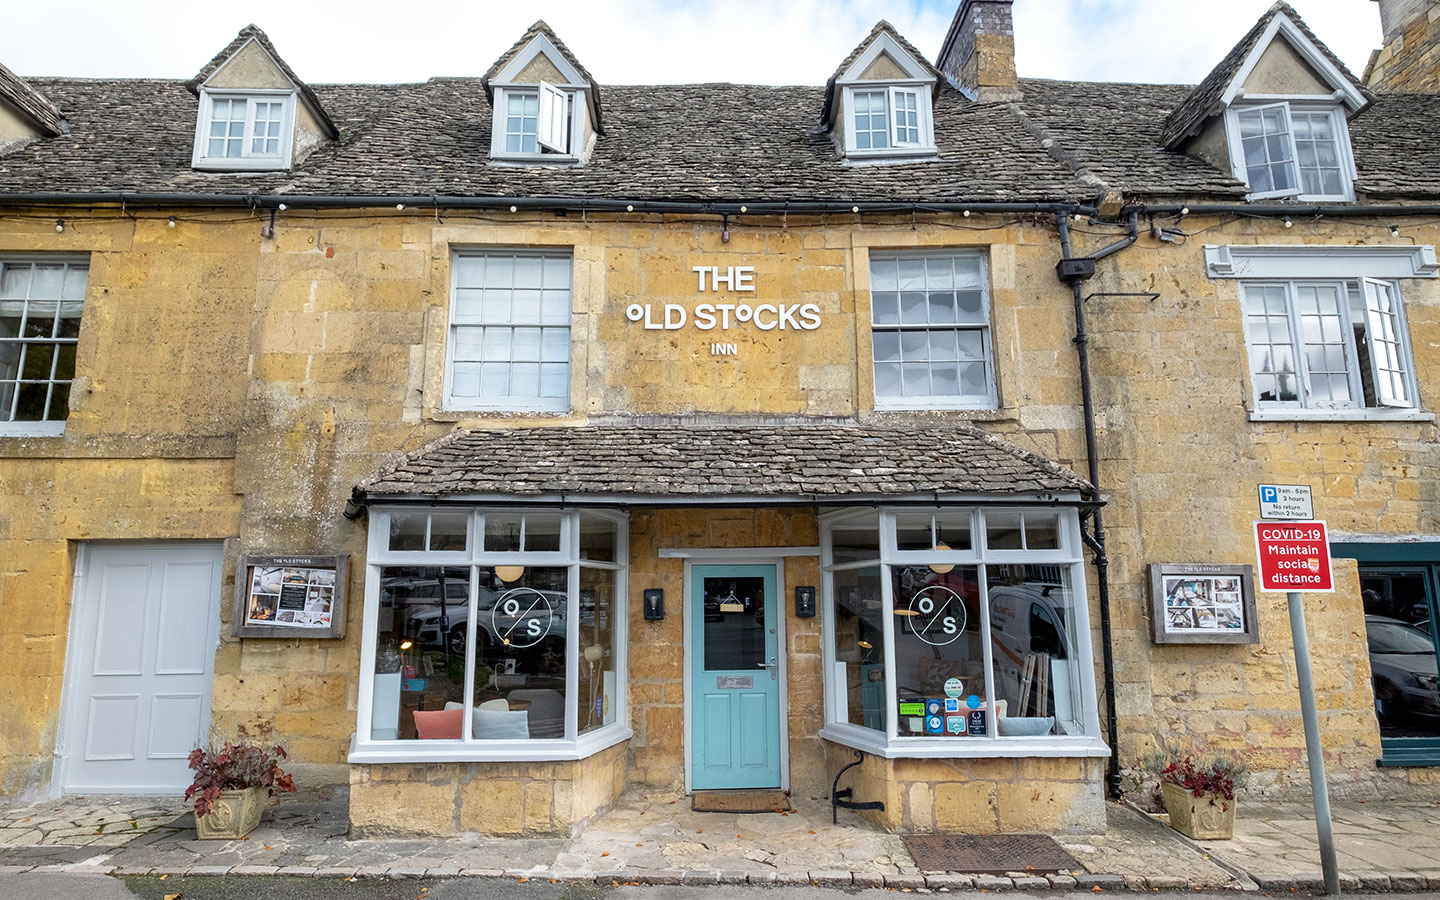 The Old Stocks Inn in Stow-on-the-Wold